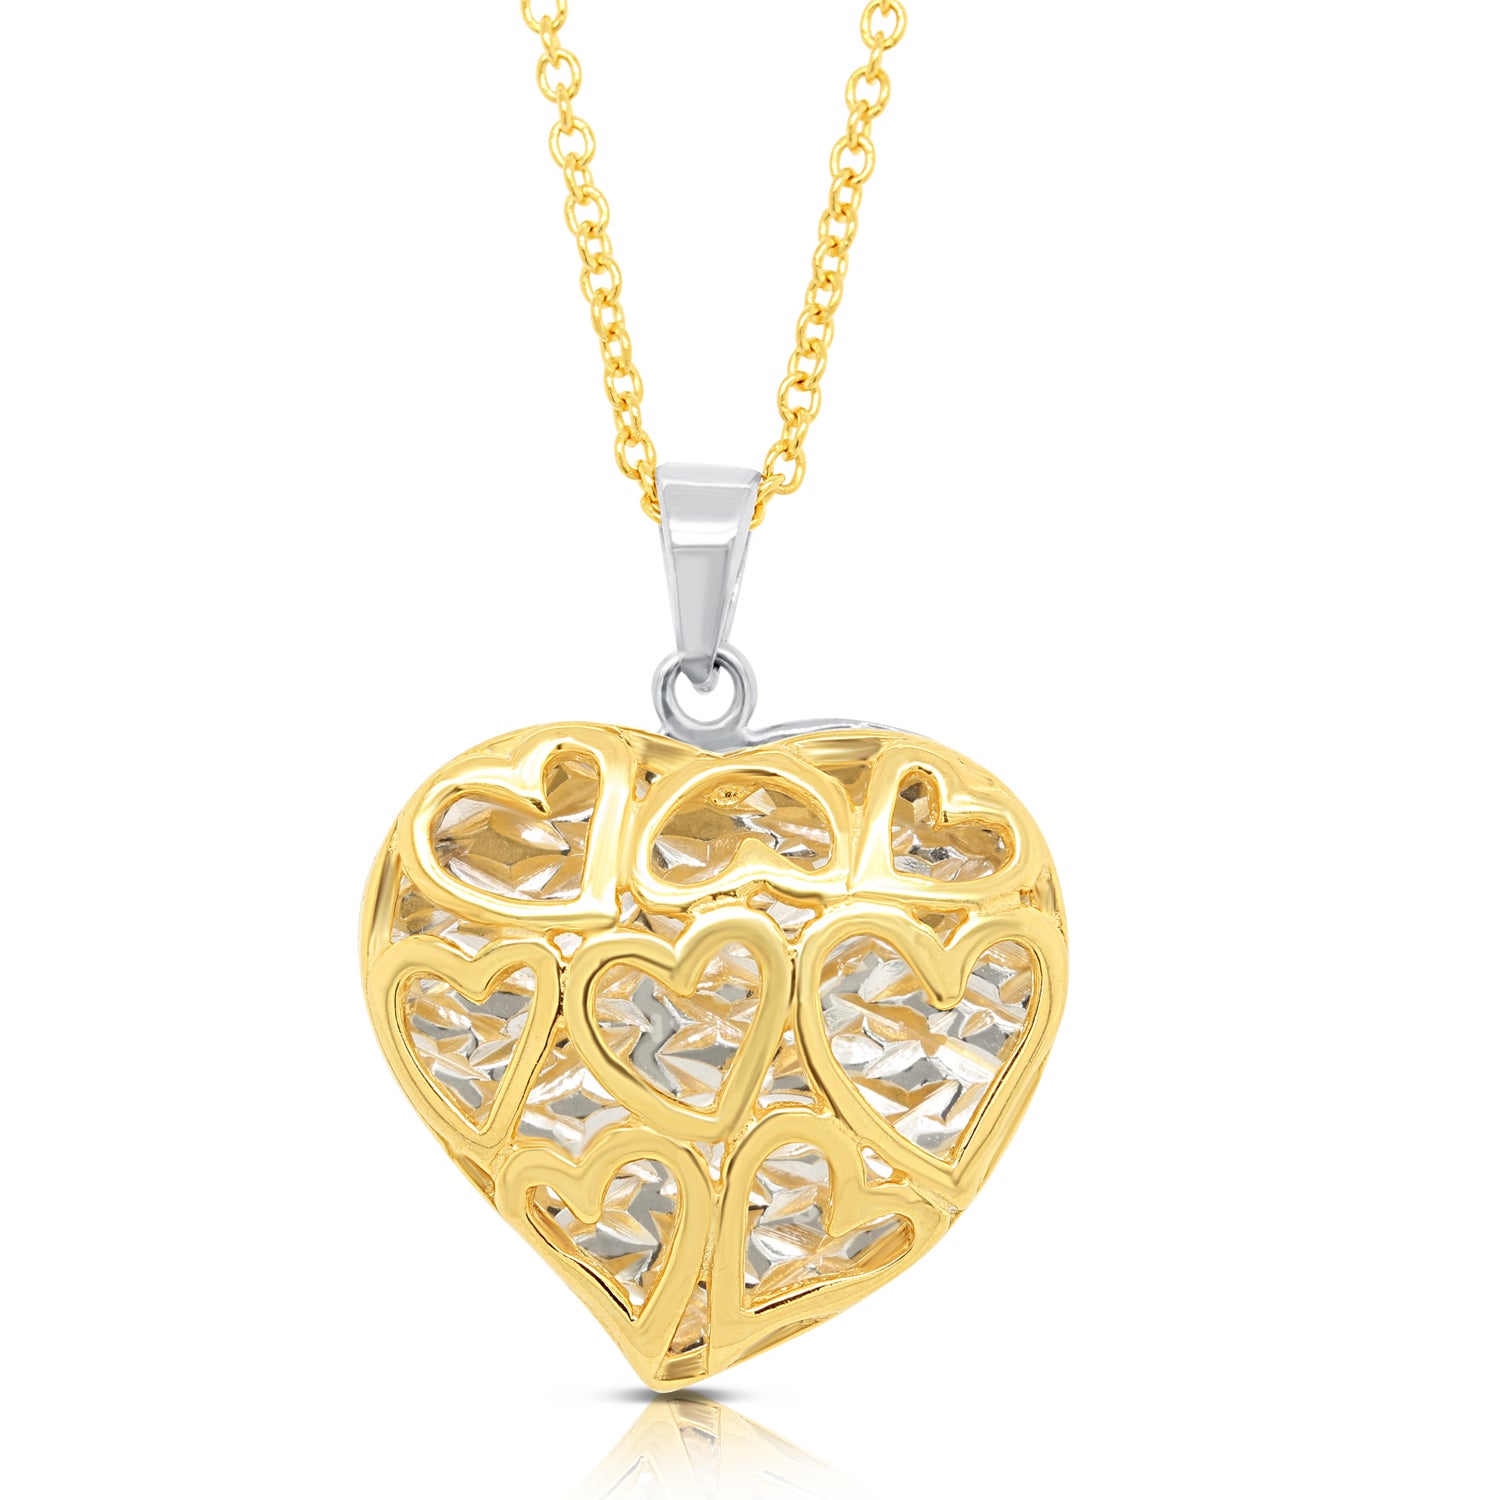 Heart Charm Necklace Yellow Gold Plated in Sterling Silver